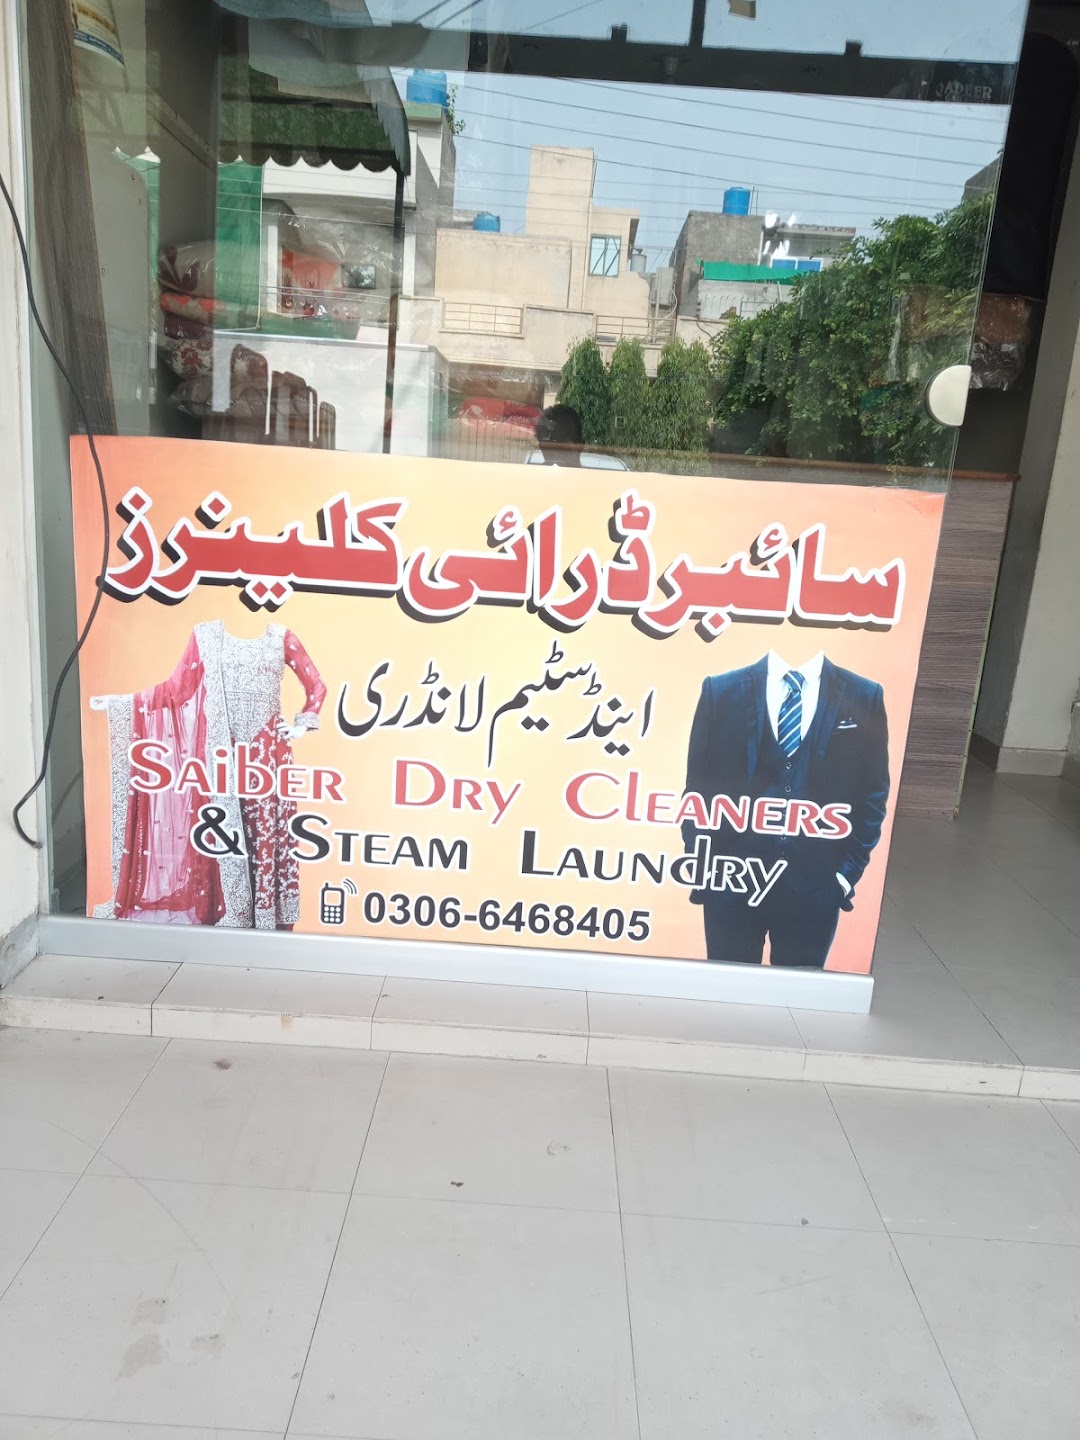 Saiber Dry Cleaners & Steam Laundry